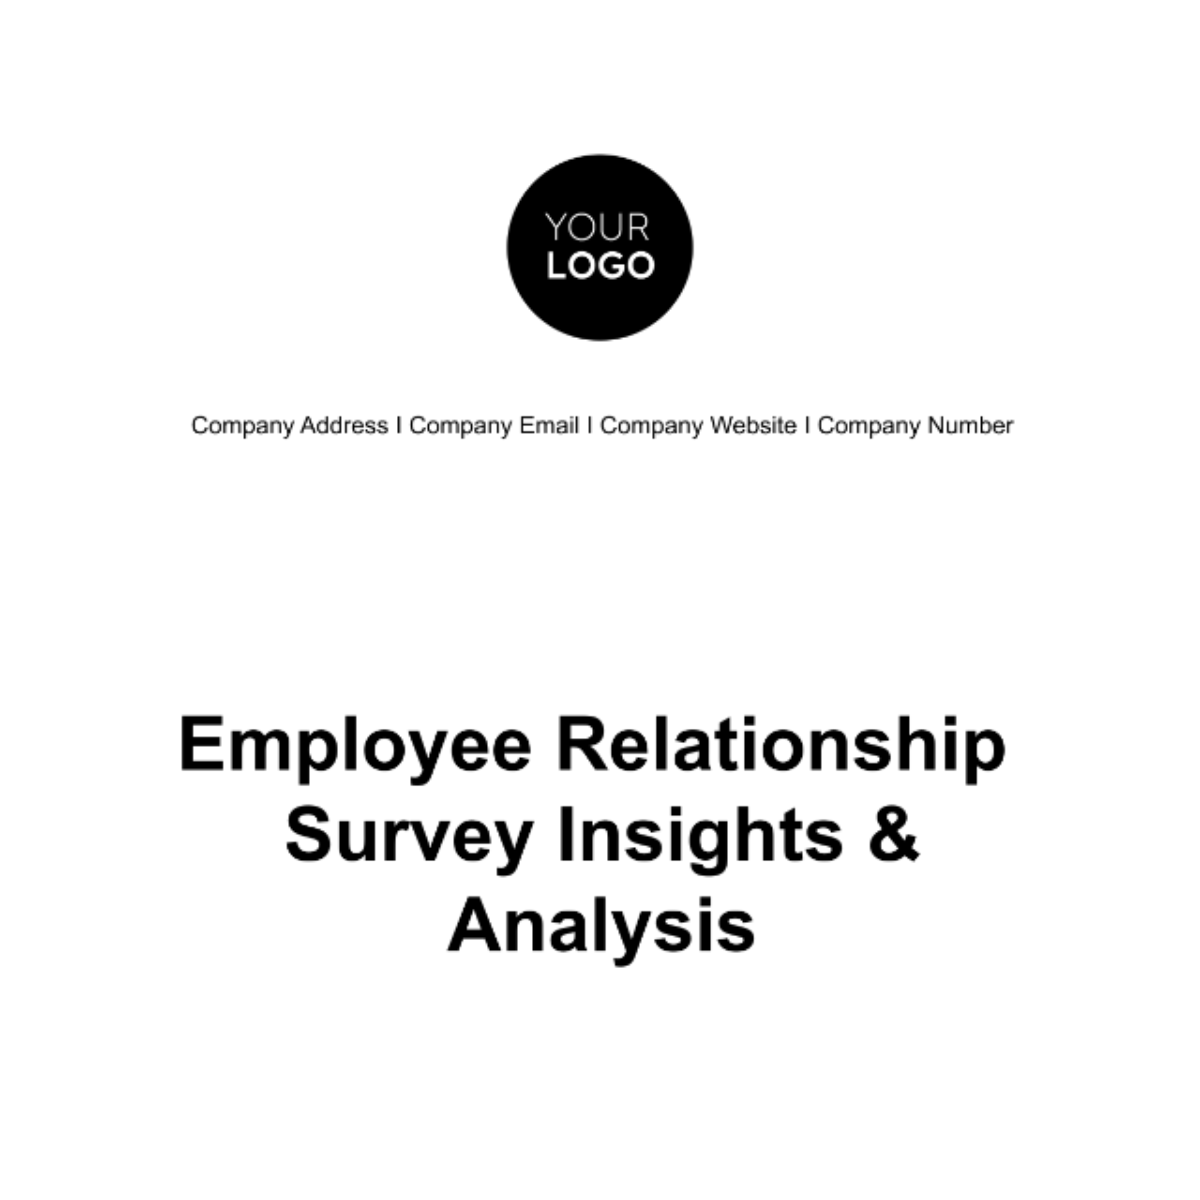 Free Employee Relationship Survey Insights & Analysis HR Template